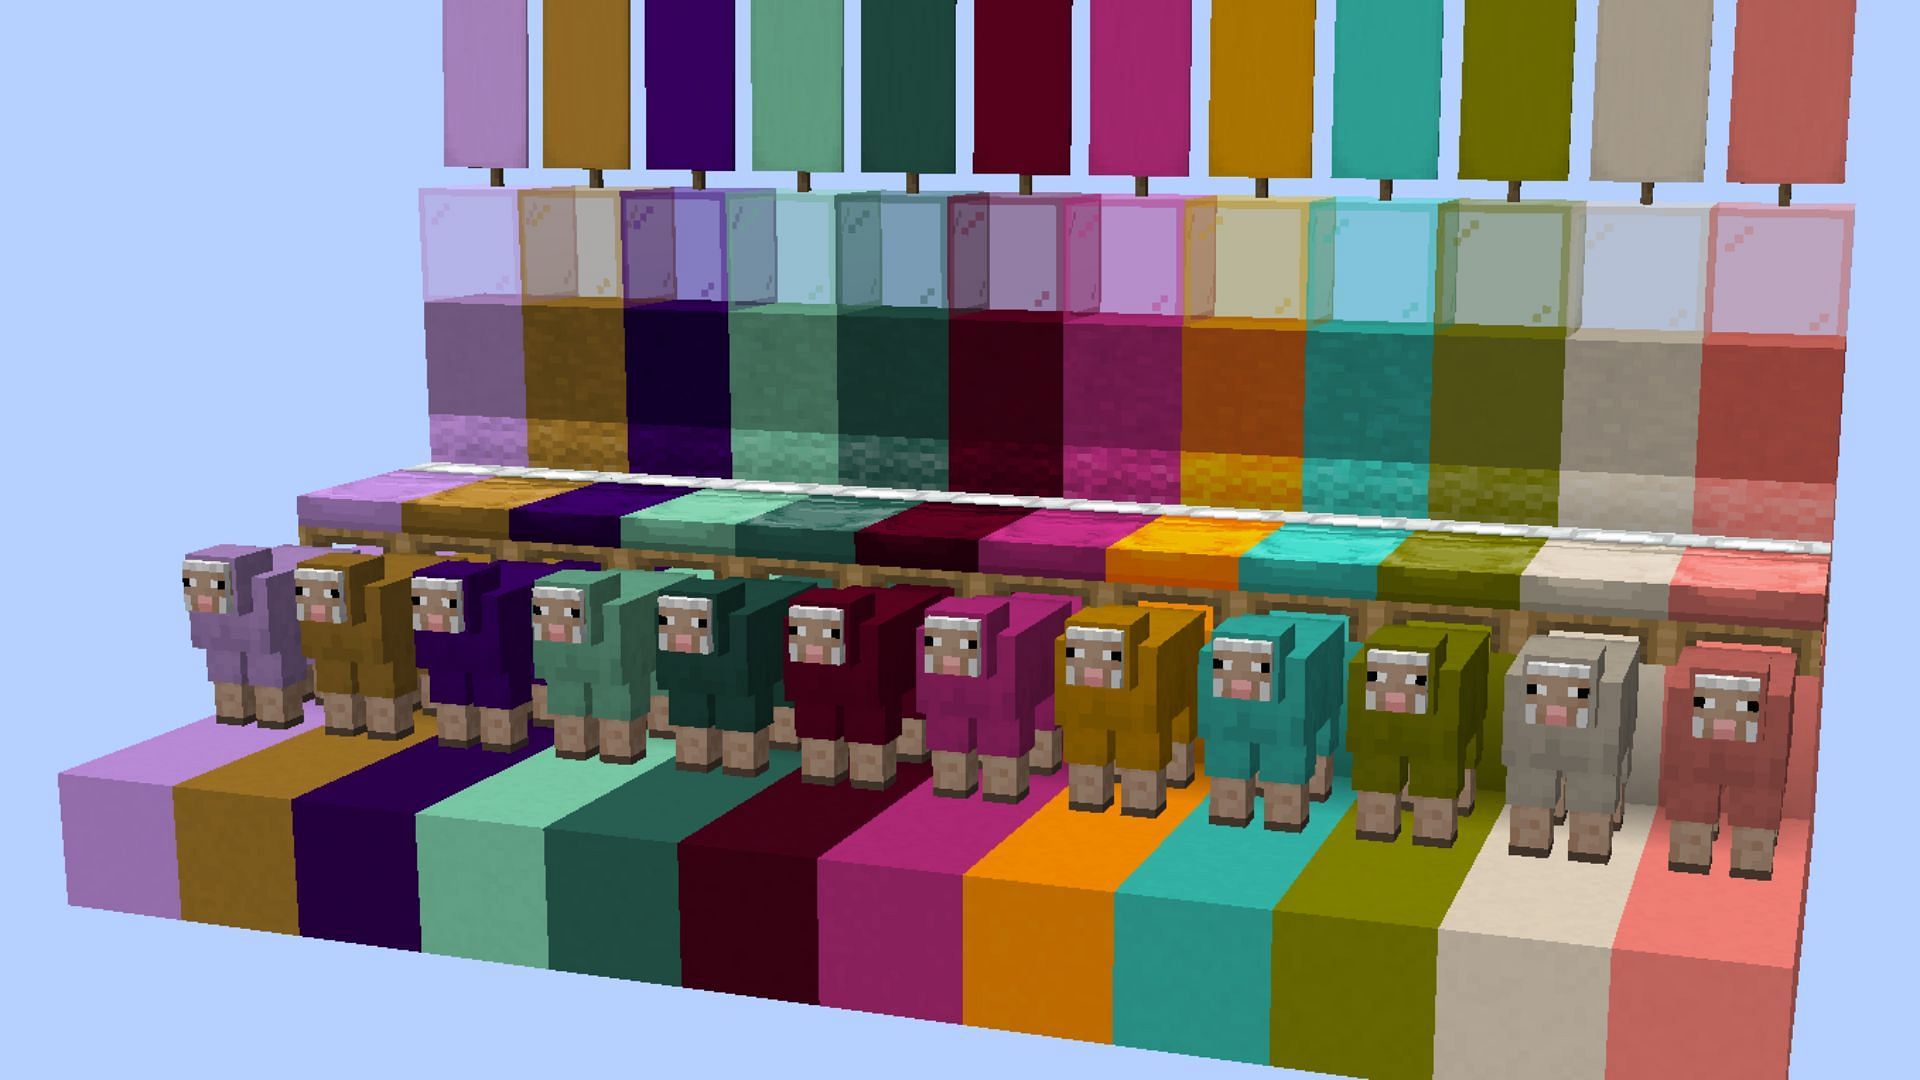 Minecraft Redditor added 12 new dyes that can be downloaded as a mod (Image via Reddit/u/itayfedar)